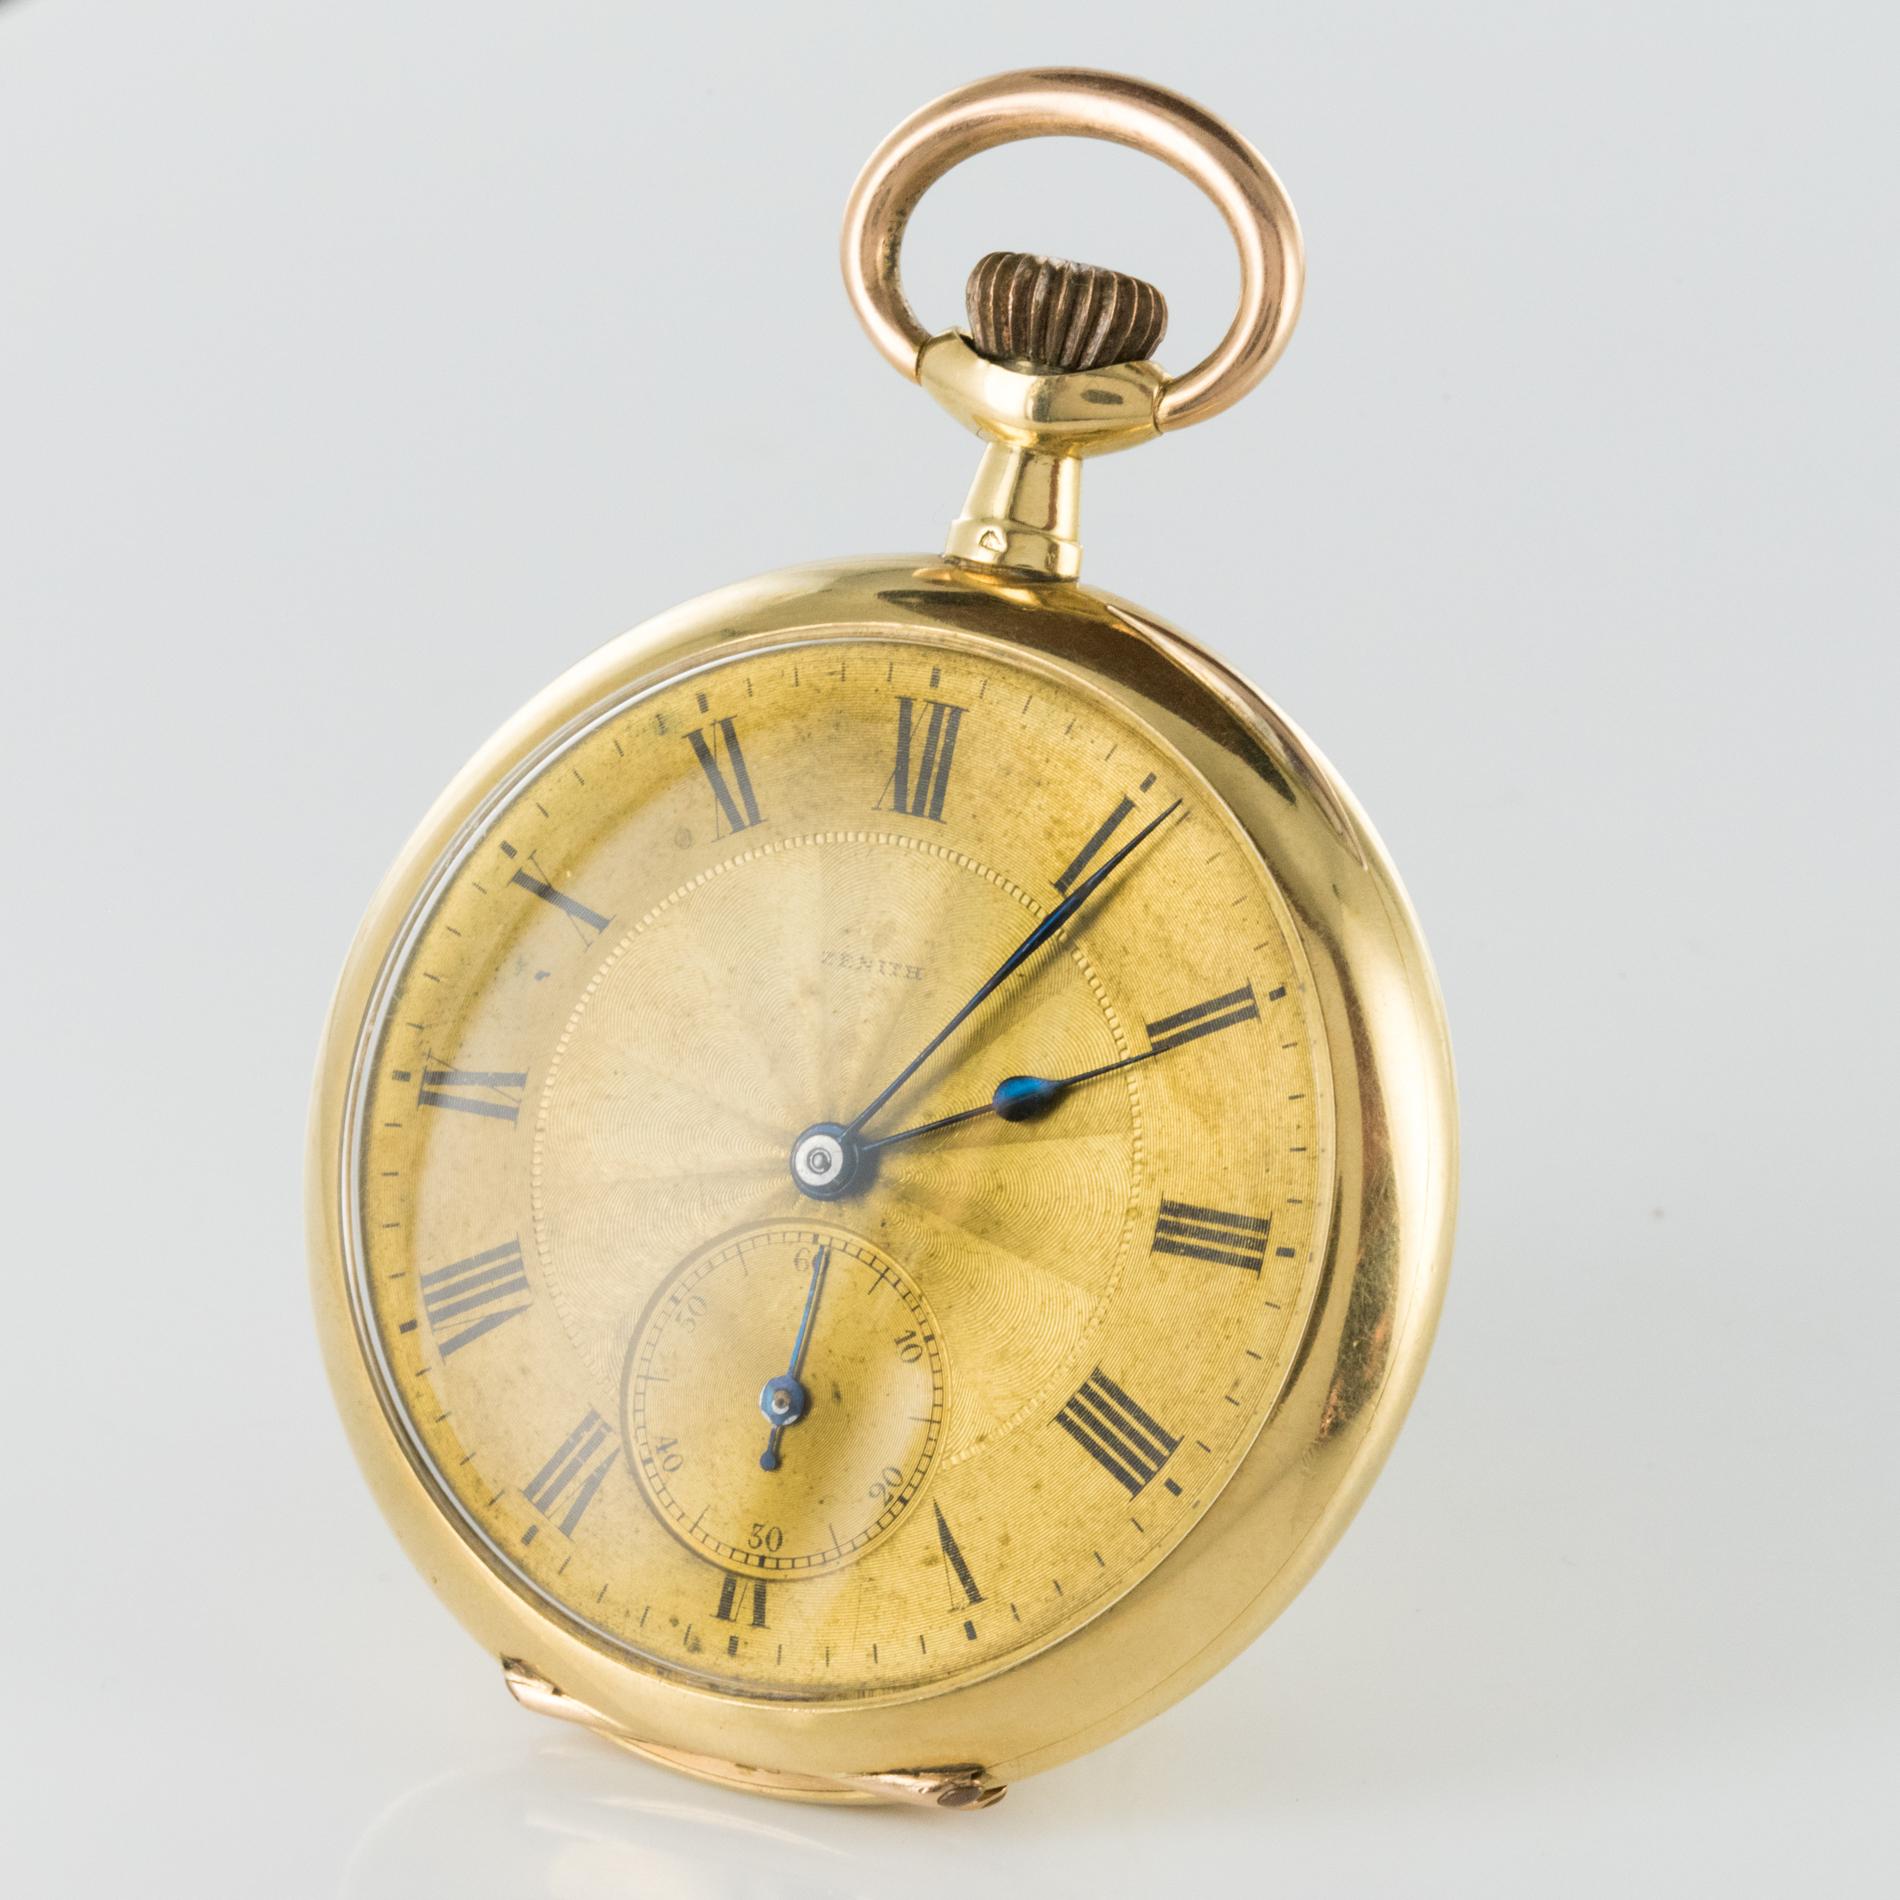 Pocket watch in 18 karats yellow and rose golds, horse's head hallmark.
Chiseled back of initials in floral decorations.
Golden background.
Roman numerals.
Small second.
Brand: Zenith.
Anchor 15 jewels.
Visible lifts double tray.
Breguet balance